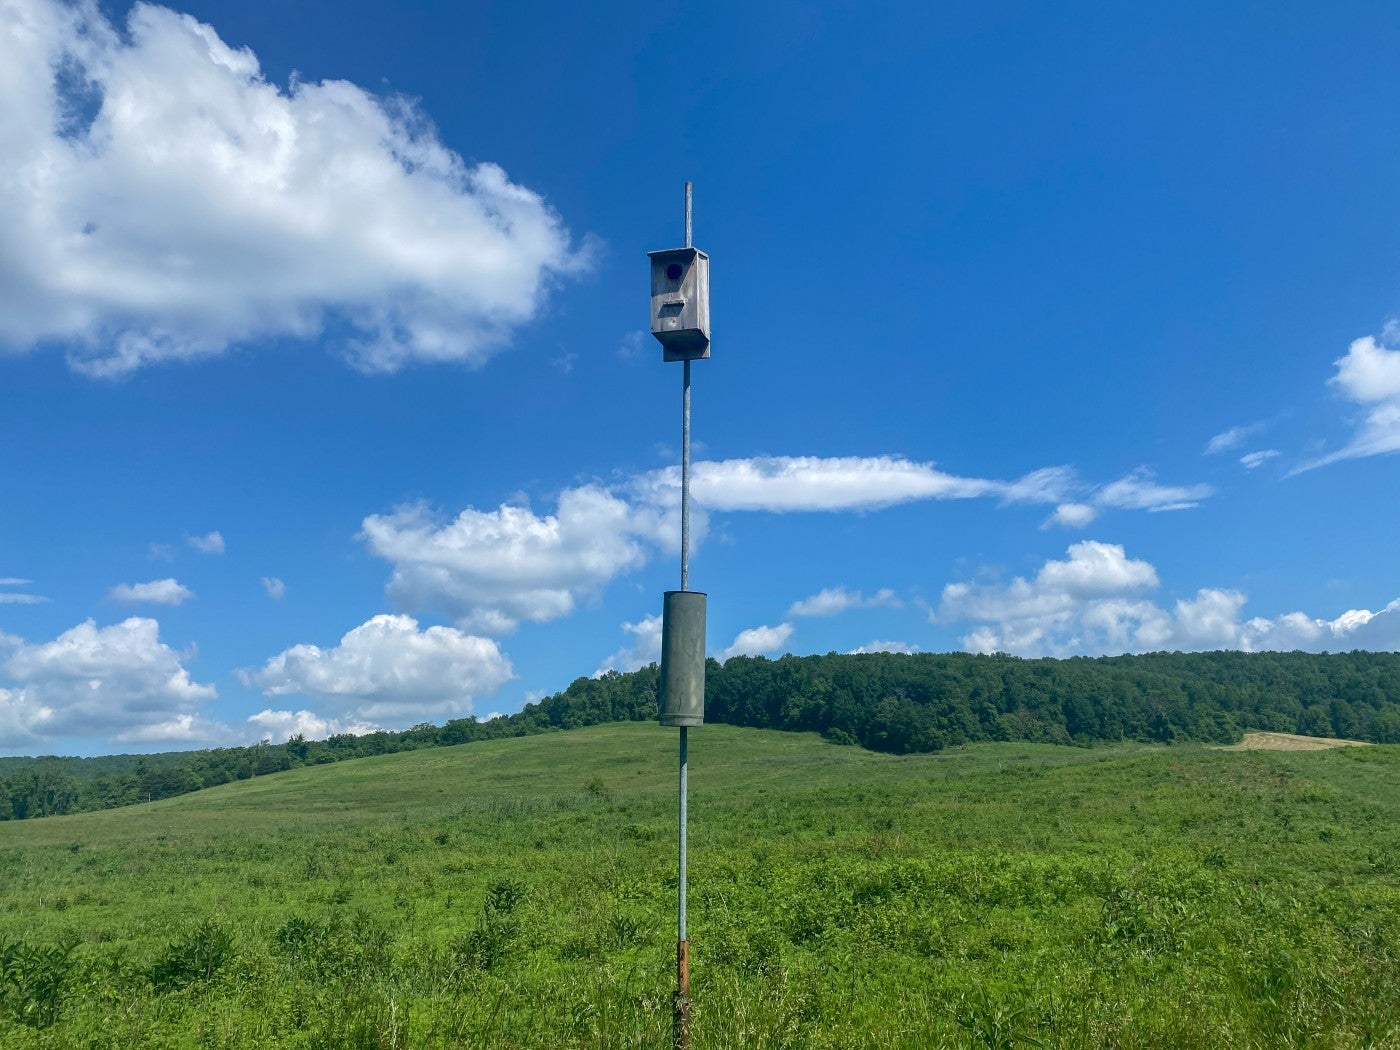 A wooden nest box on a tall pole in the middle of an open grassy field